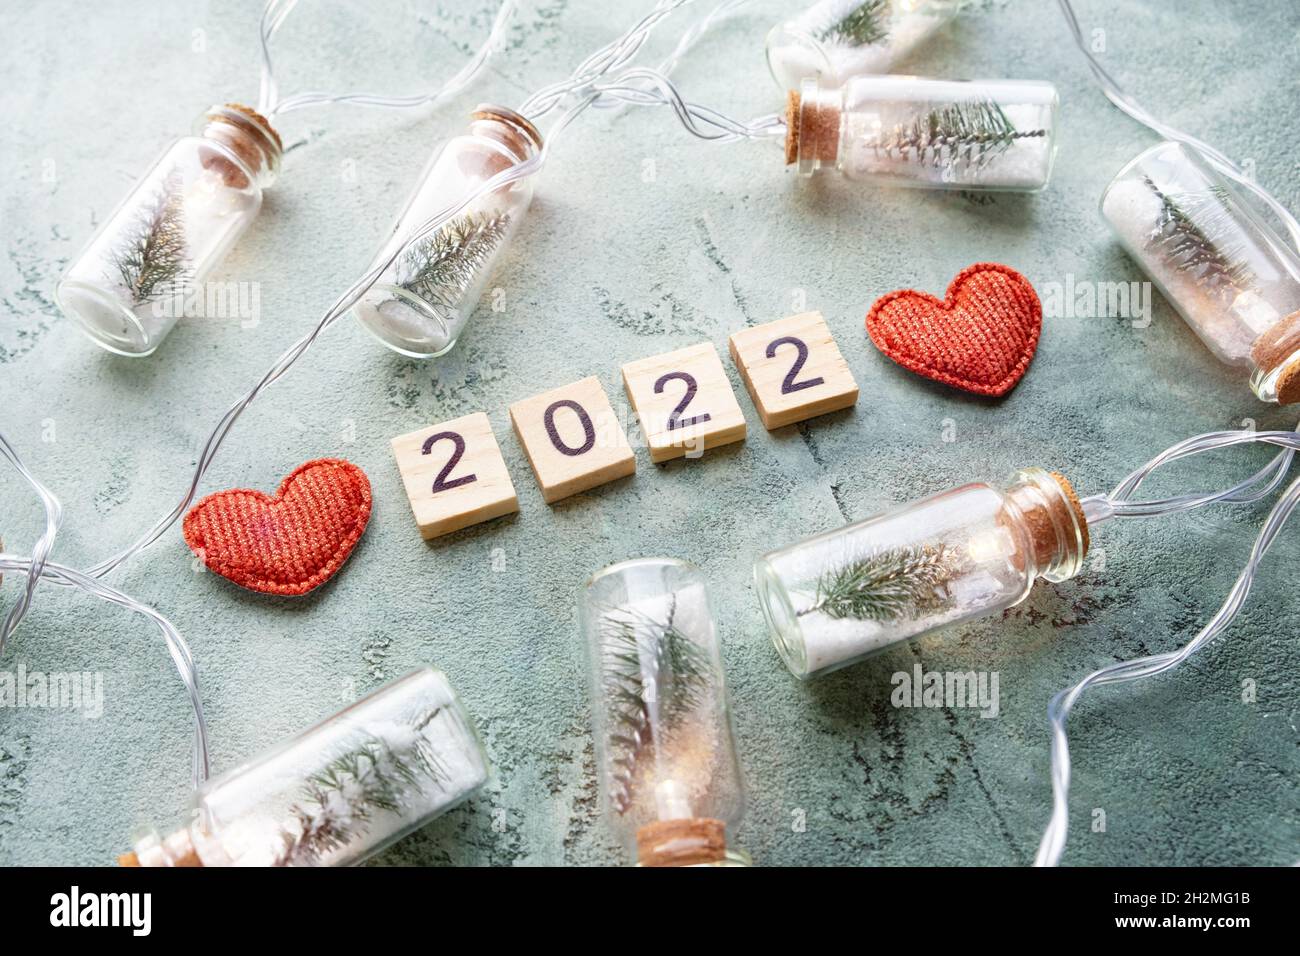 Number 2022 on wooden squares and a glowing garland of glass jars with Christmas trees and snow inside and two hearts on a textured green background Stock Photo